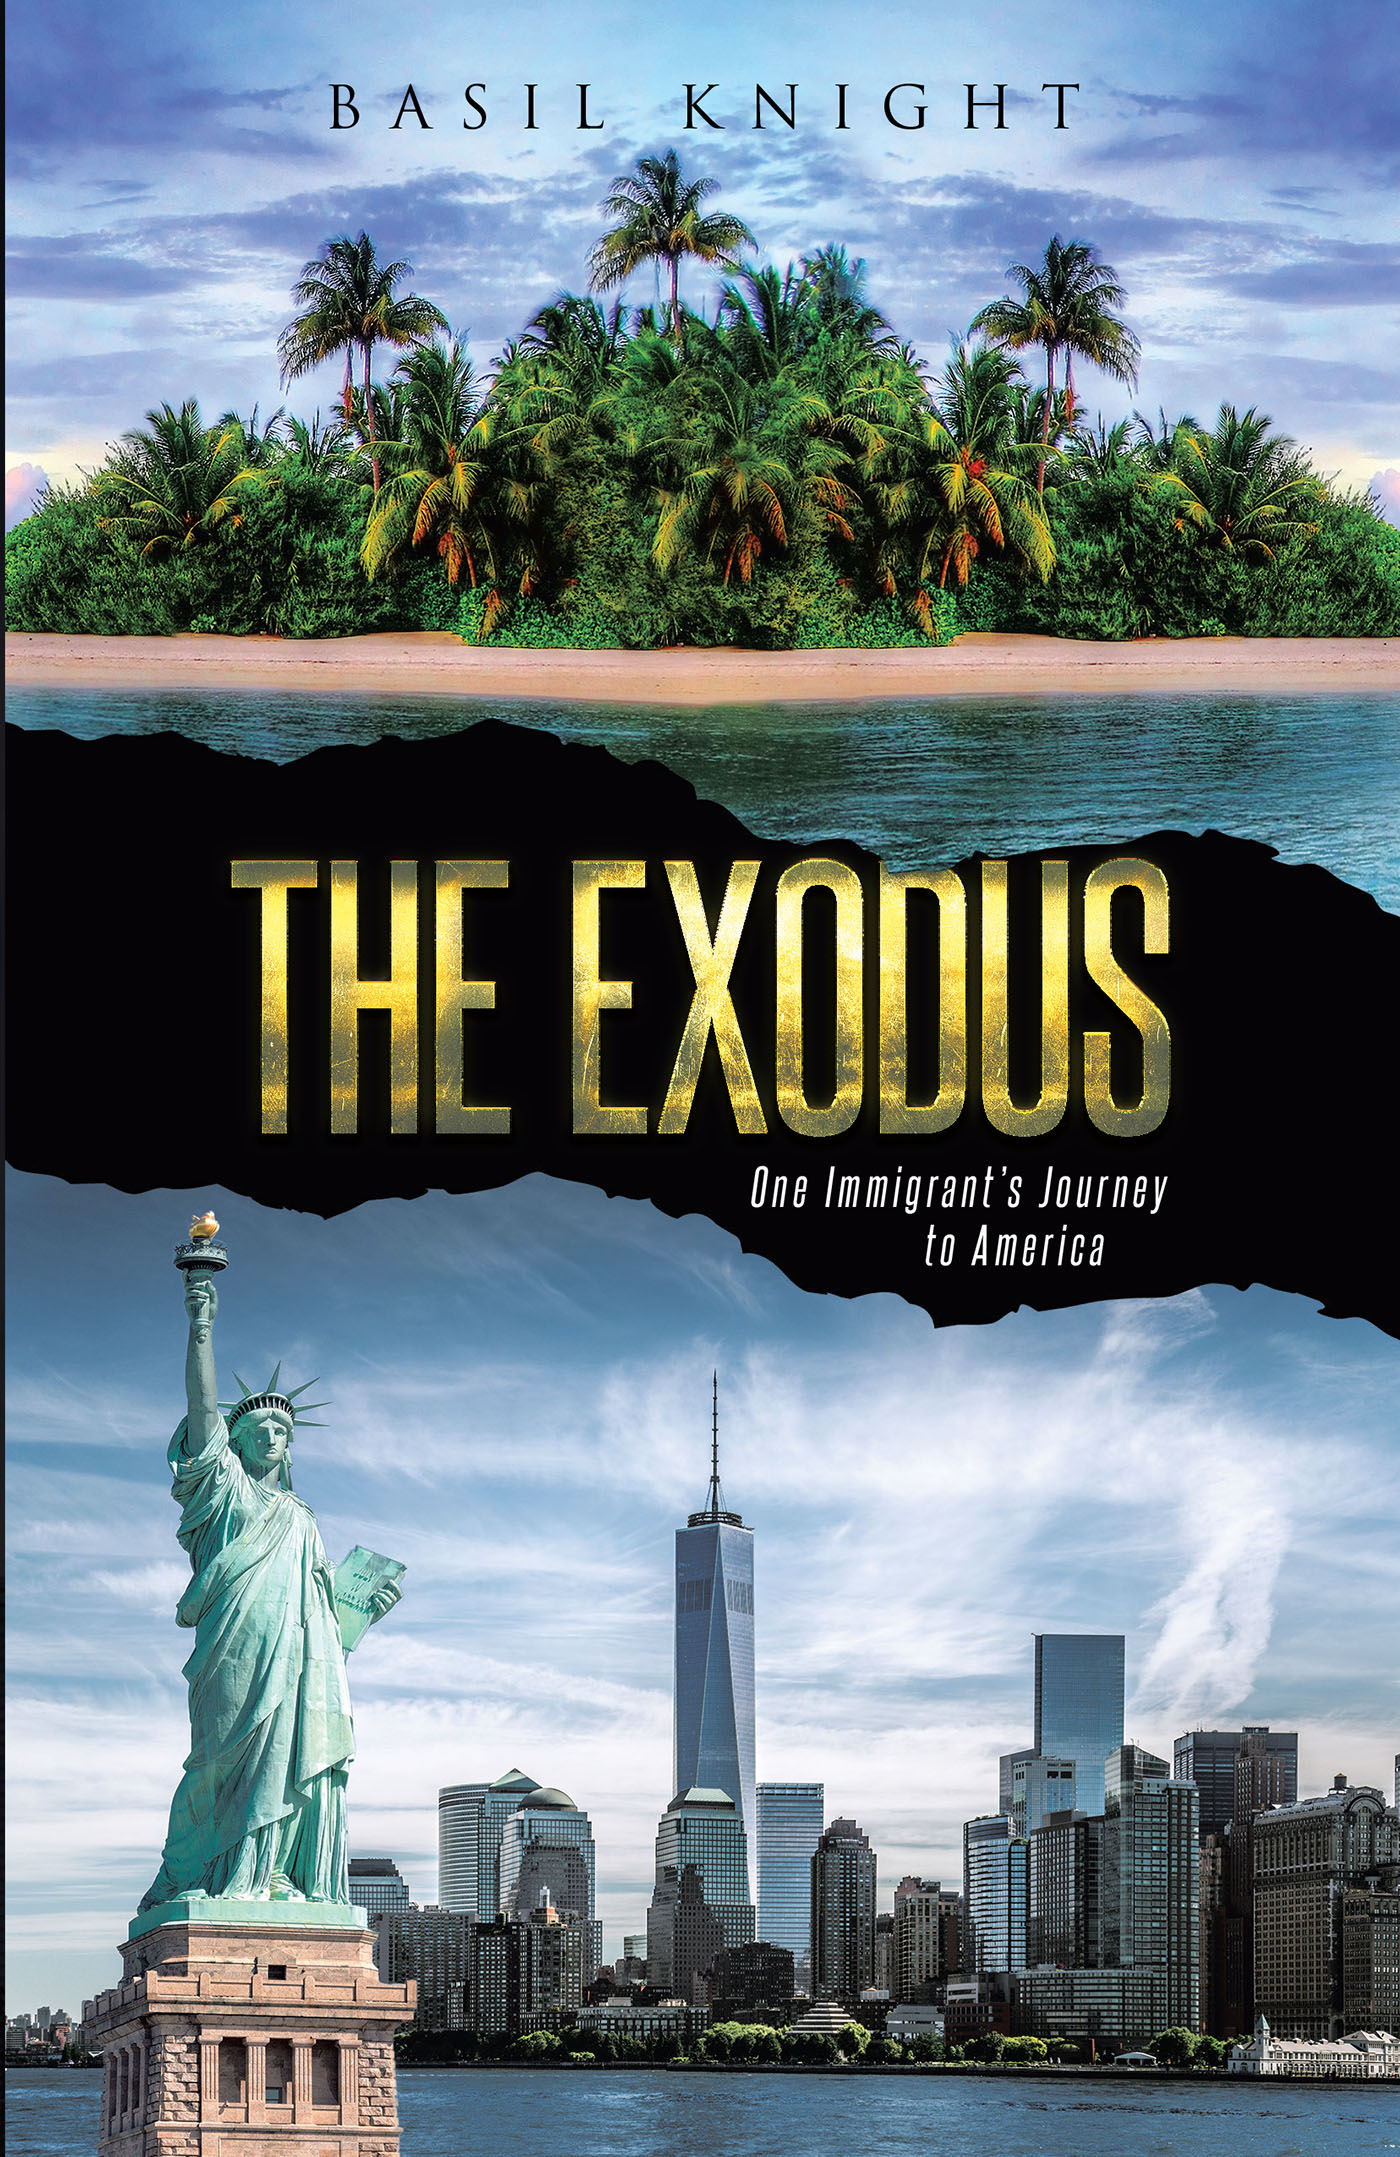 Author Basil Knight’s New Book, "The Exodus: One Immigrant's Journey to America," Centers Around a Man Named Peter Who Moves from Jamaica to Find a New Life in America